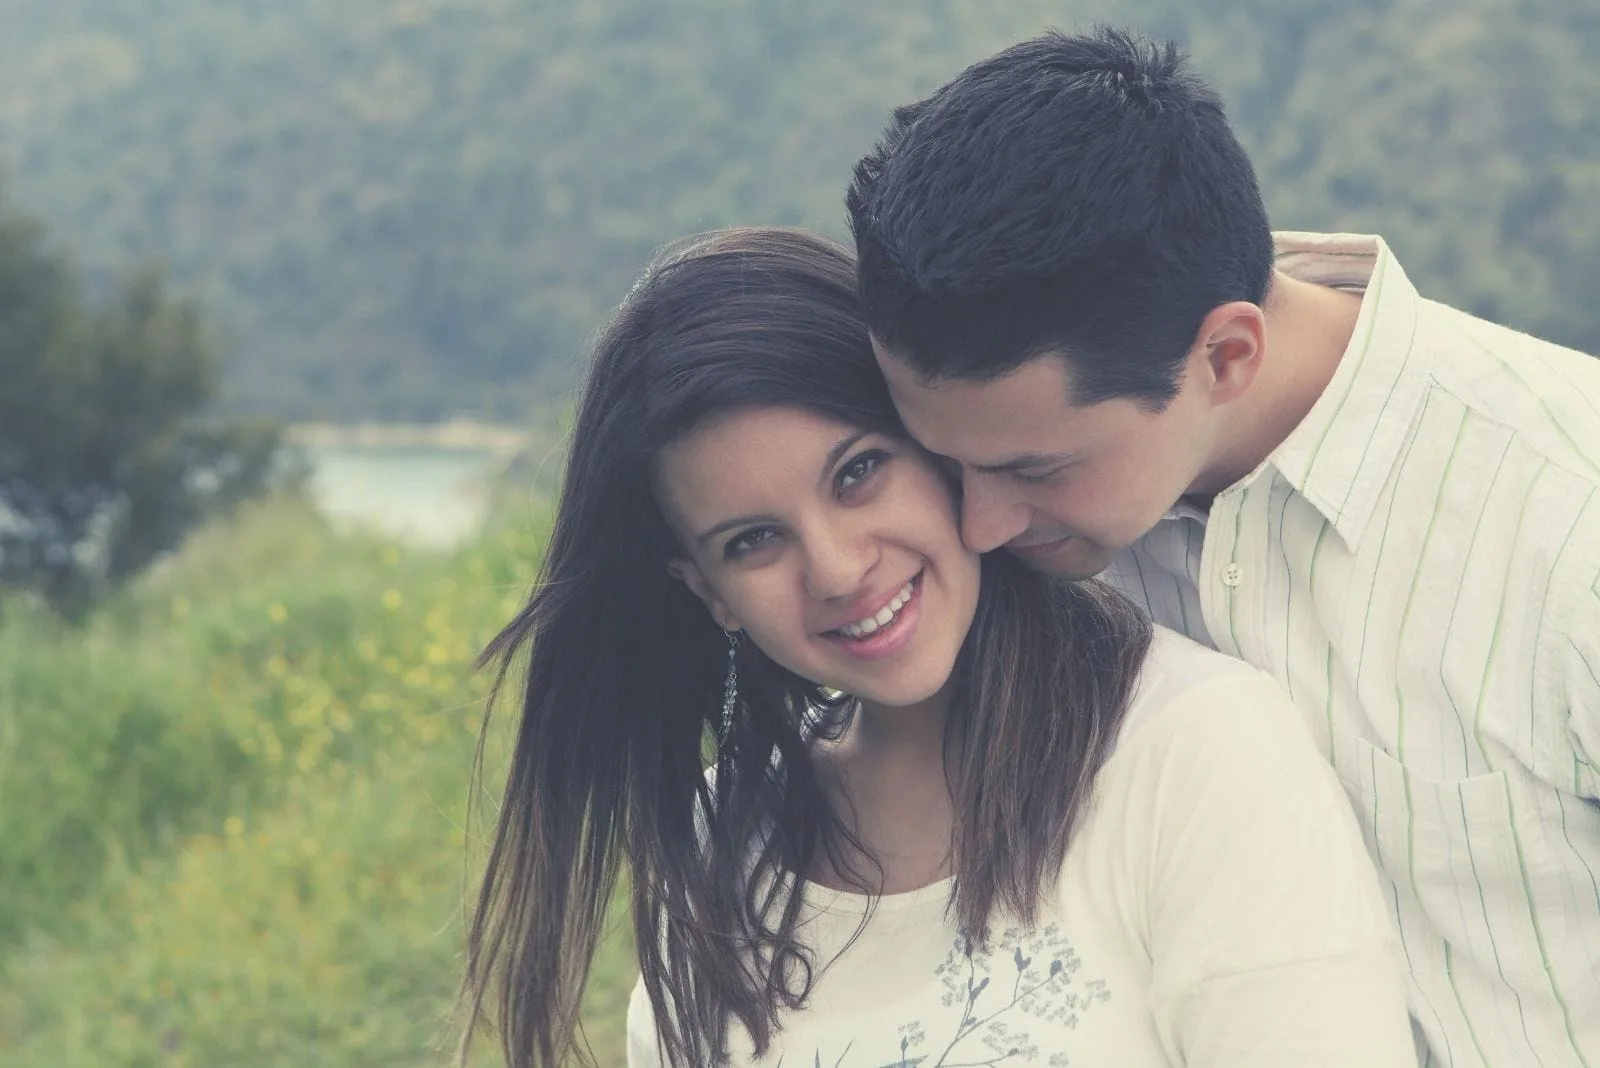 man snuggling attractive woman standing in the field in close up image